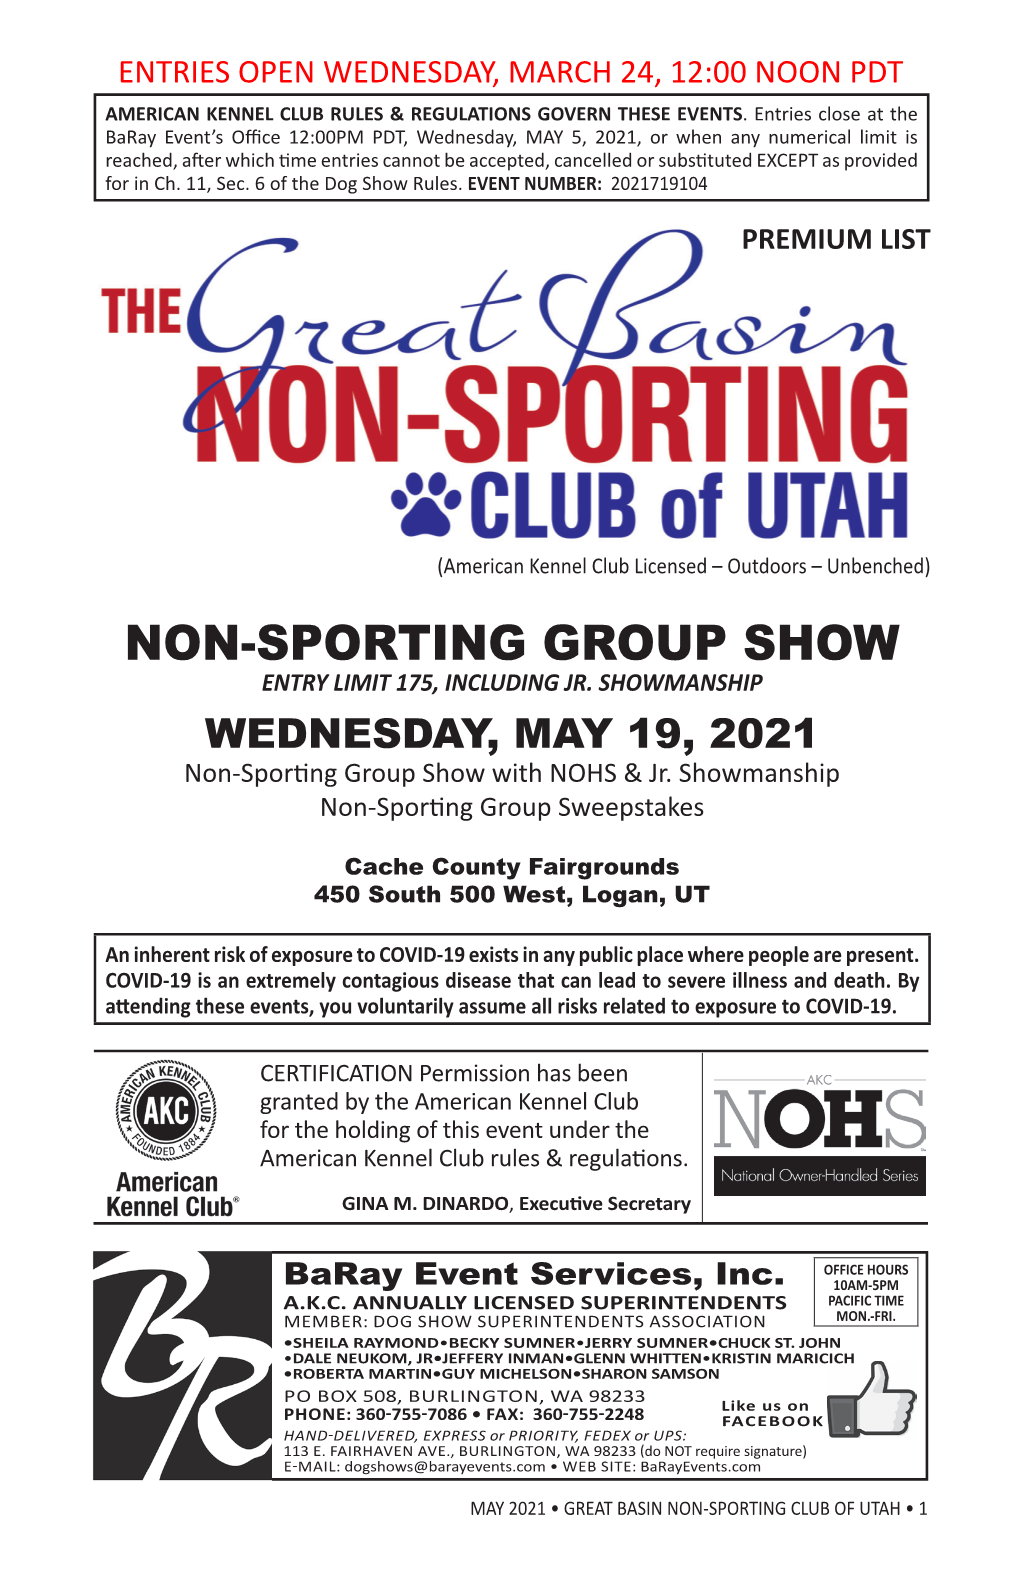 Non-Sporting Group Show Entry Limit 175, Including Jr